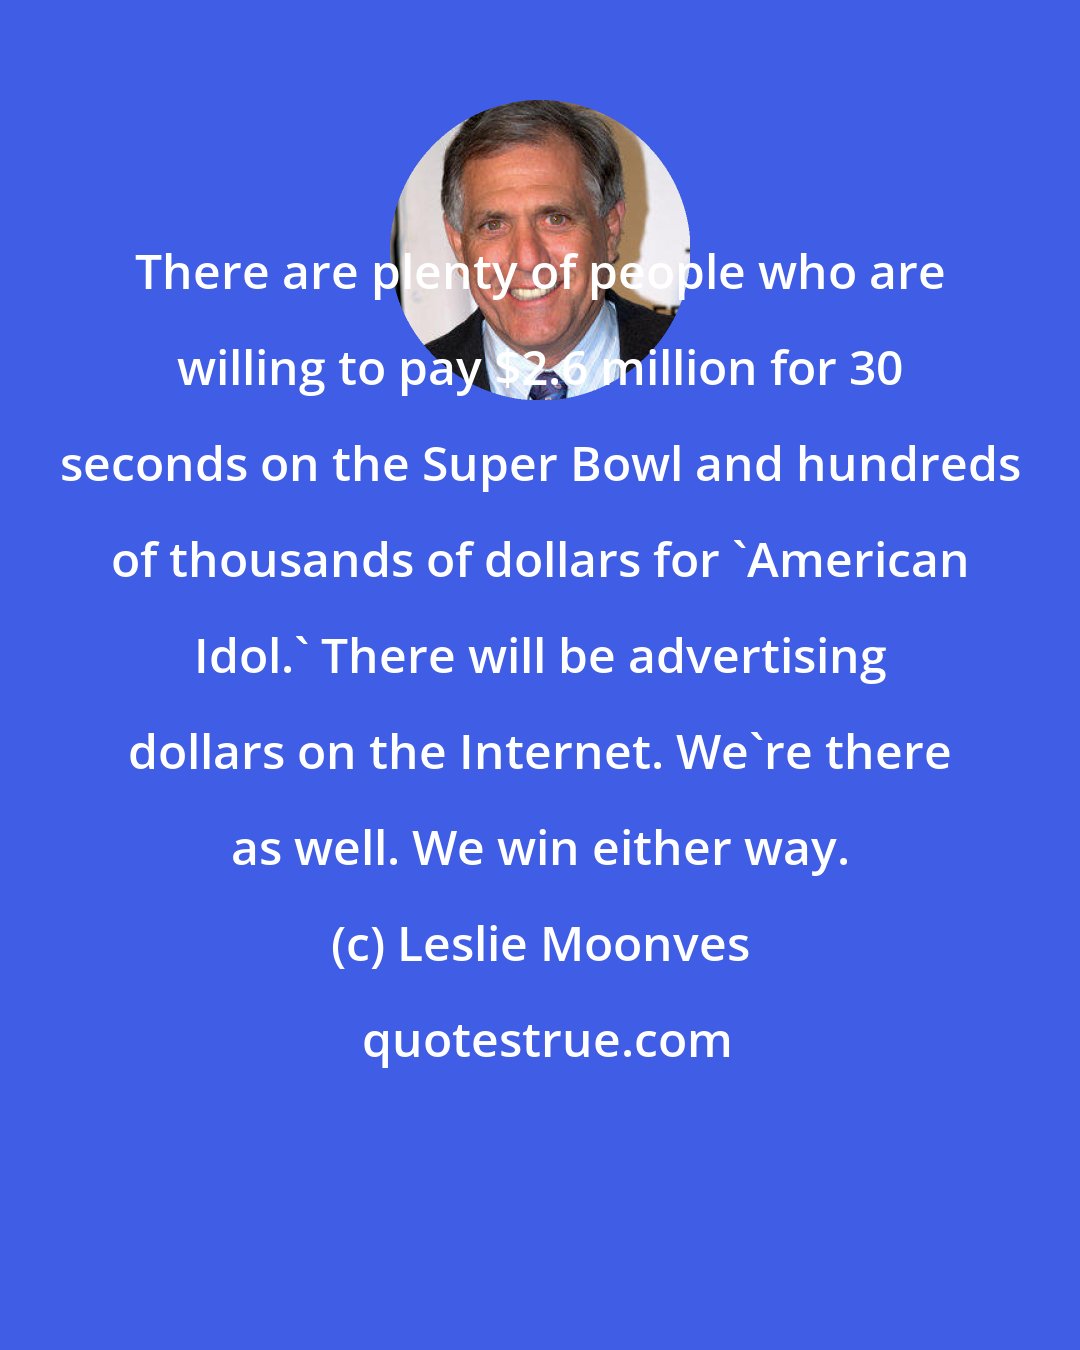 Leslie Moonves: There are plenty of people who are willing to pay $2.6 million for 30 seconds on the Super Bowl and hundreds of thousands of dollars for 'American Idol.' There will be advertising dollars on the Internet. We're there as well. We win either way.